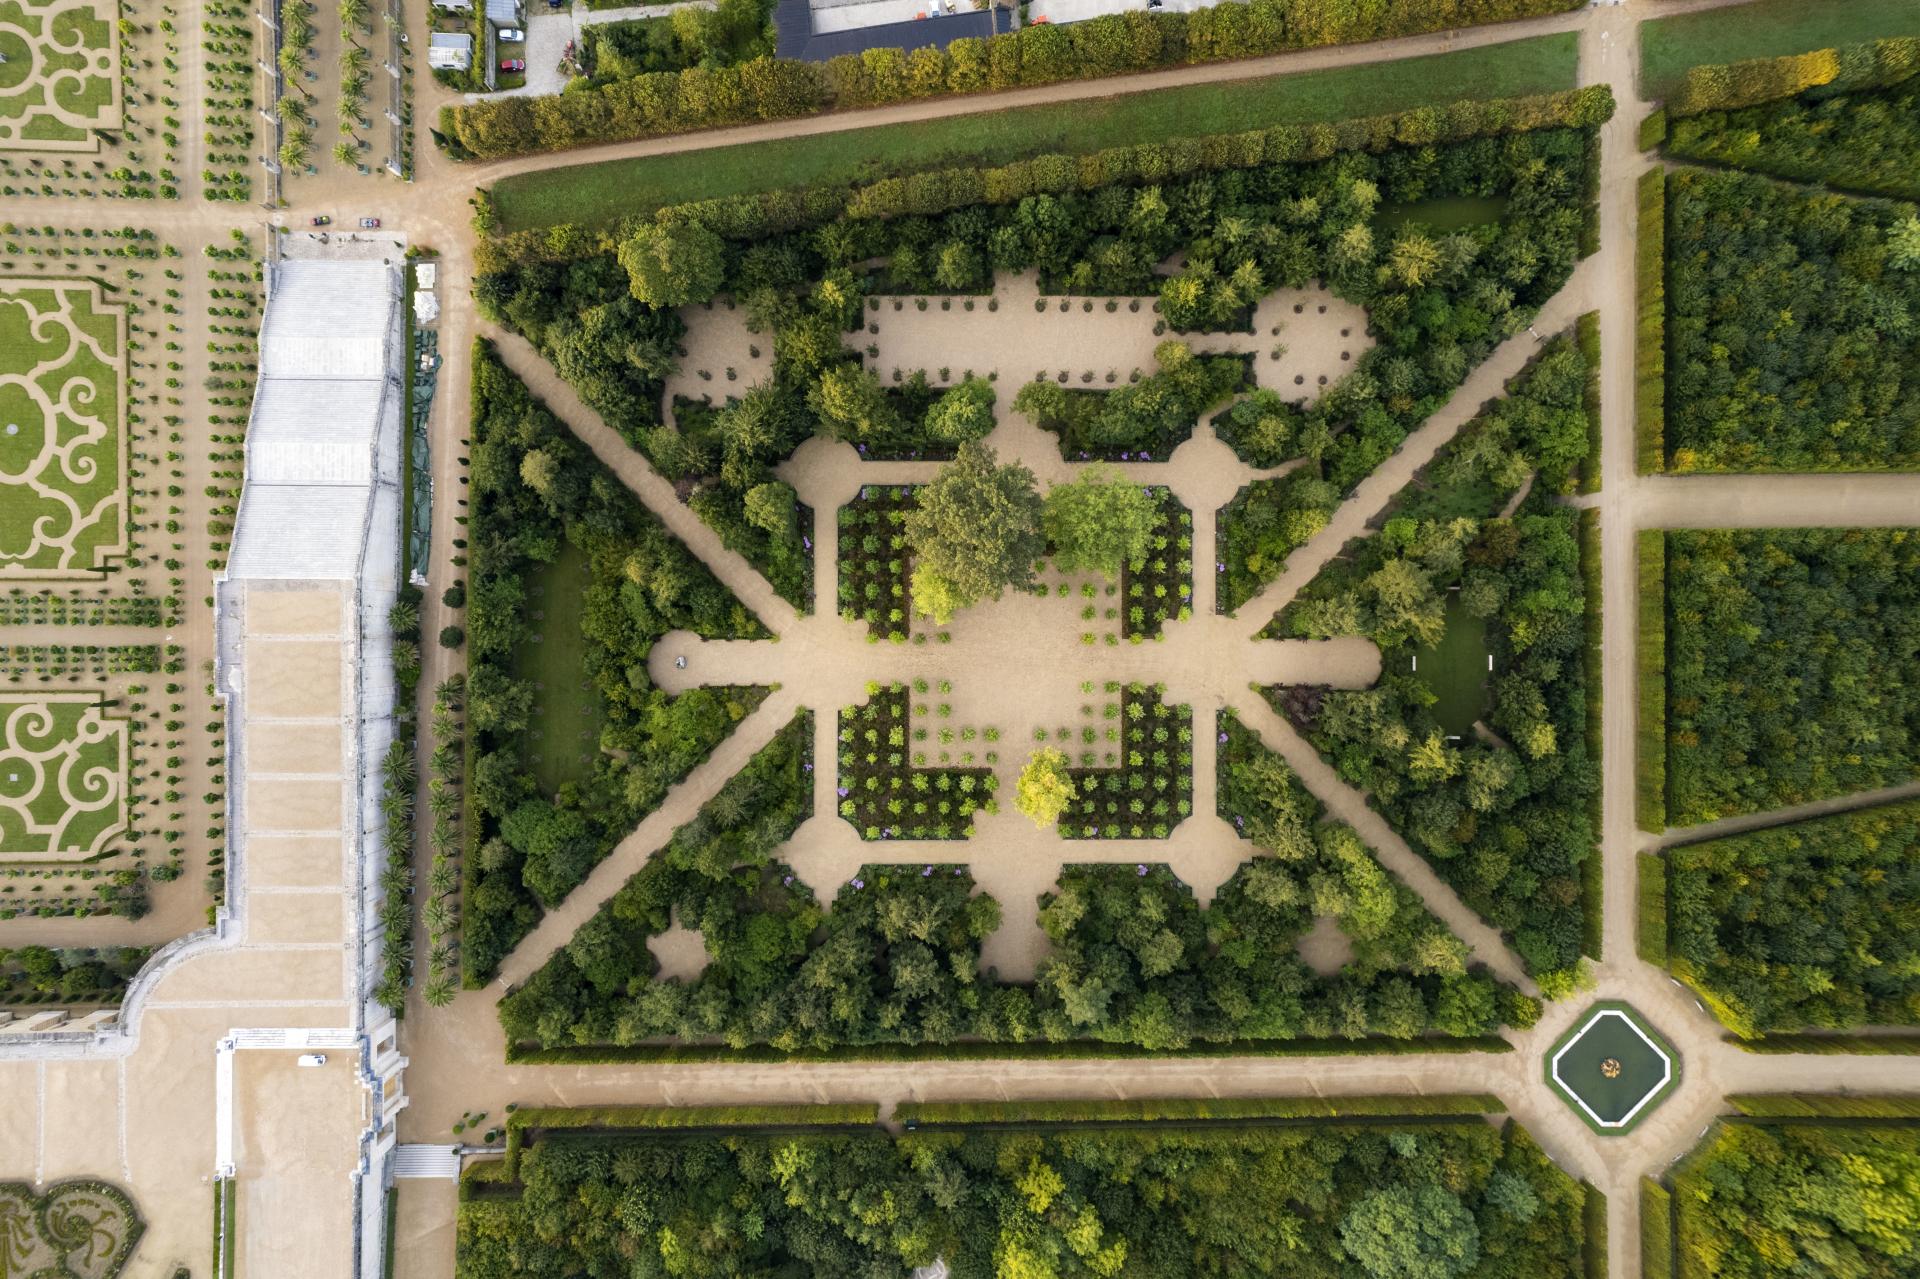 The Gardens  Palace of Versailles